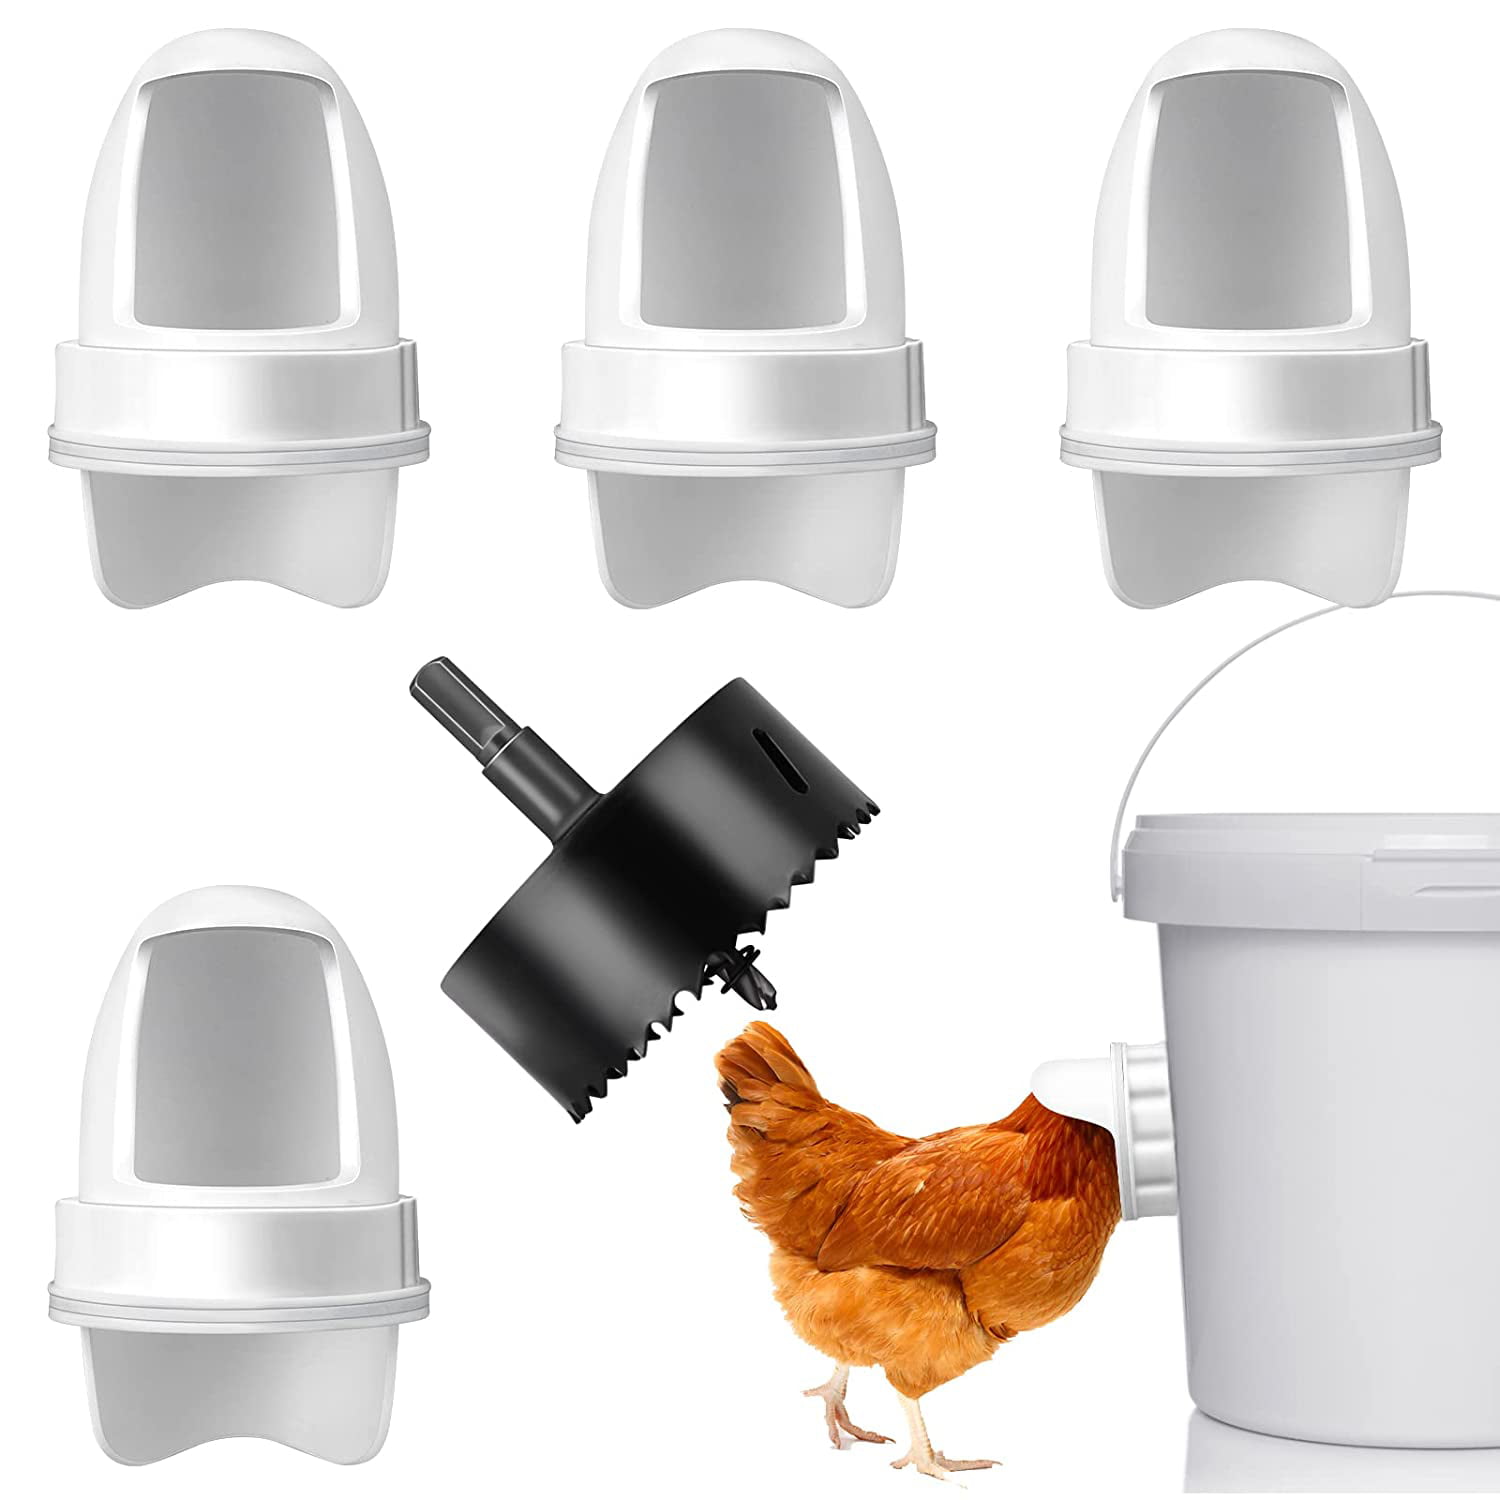 HHXRISE Chicken Feeder No Waste,8 Ports and 1 Hole Saw Rainproof… DIY Poultry Feeder Port Gravity Automatic Fed Kit for Buckets,Barrels,Bins,Troughs 